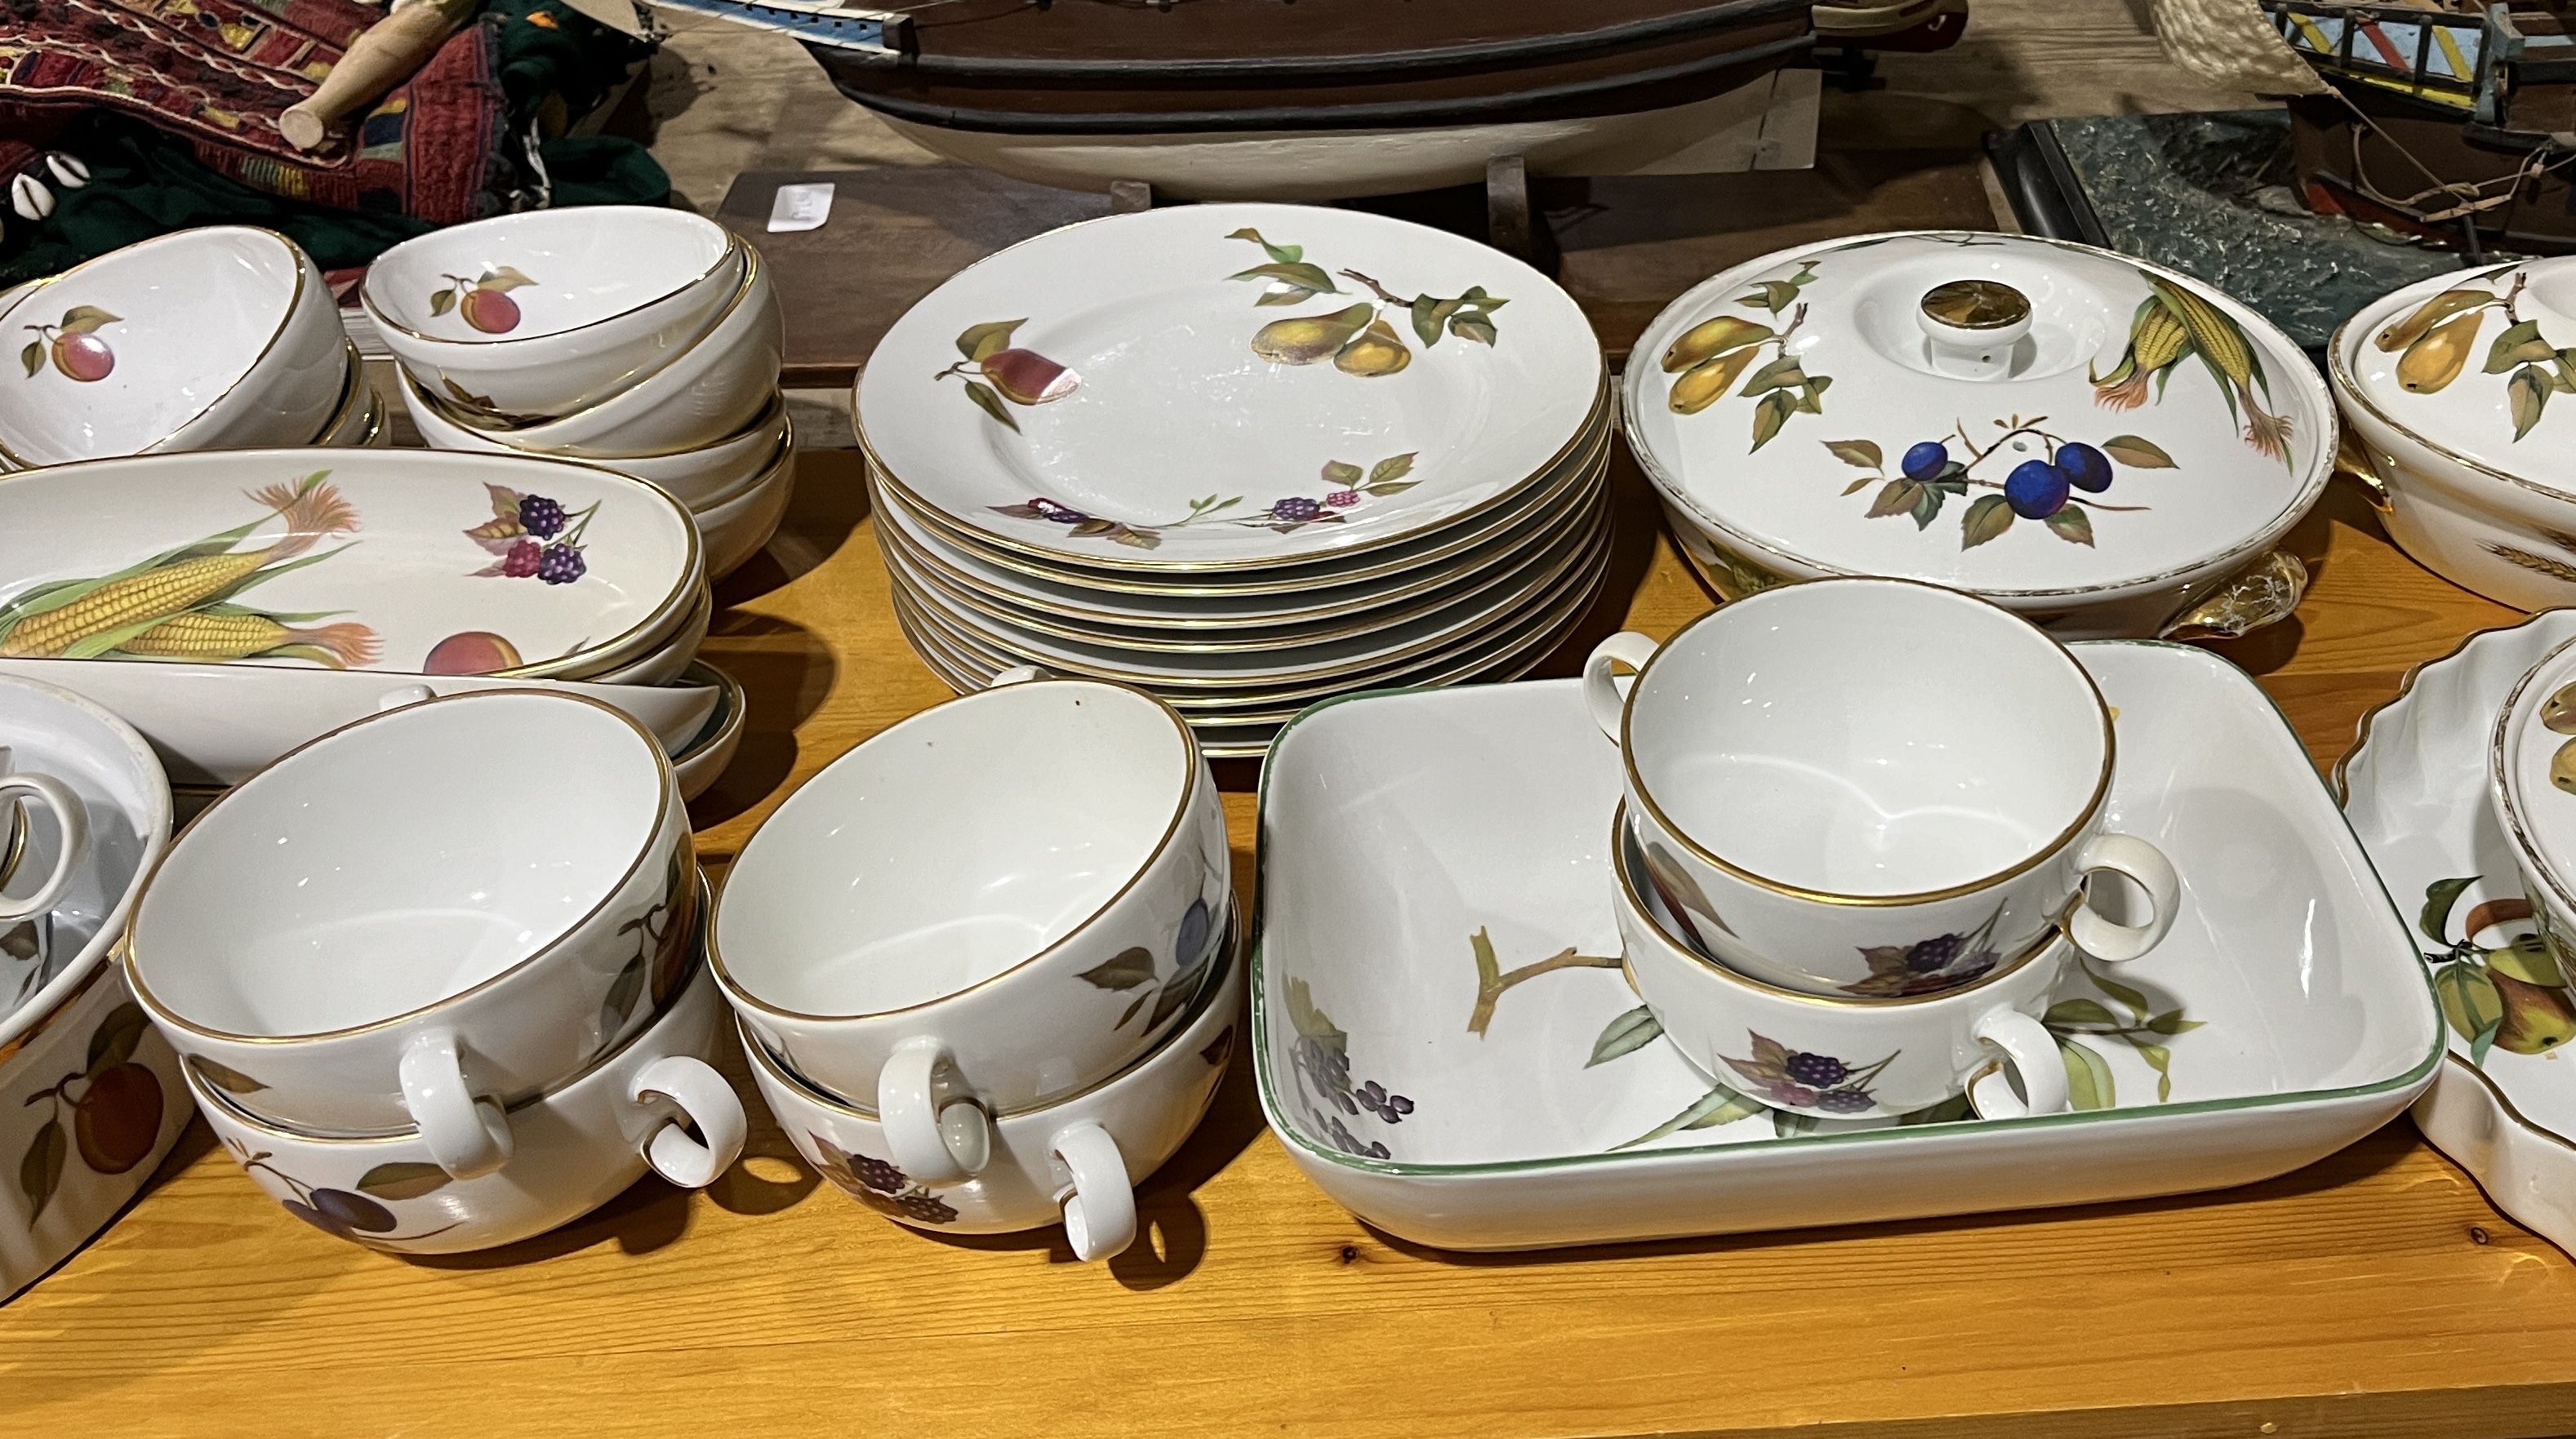 A large collection of Royal Worcester "Evesham" dinner ware including plates, bowls, terrines etc. - Image 3 of 4